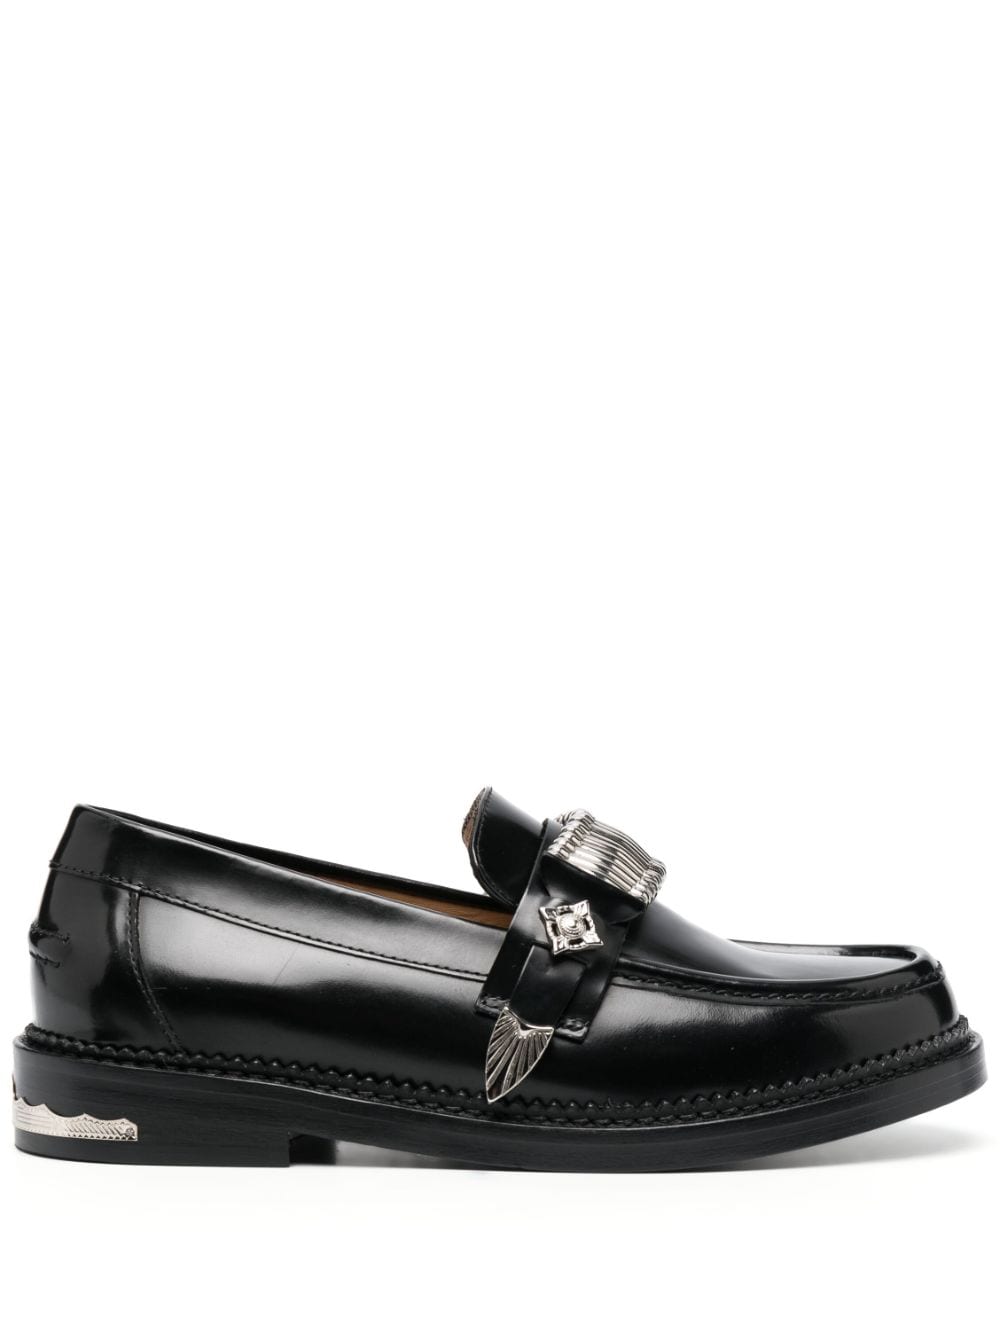 Image 1 of Toga Pulla buckle-detail leather loafers